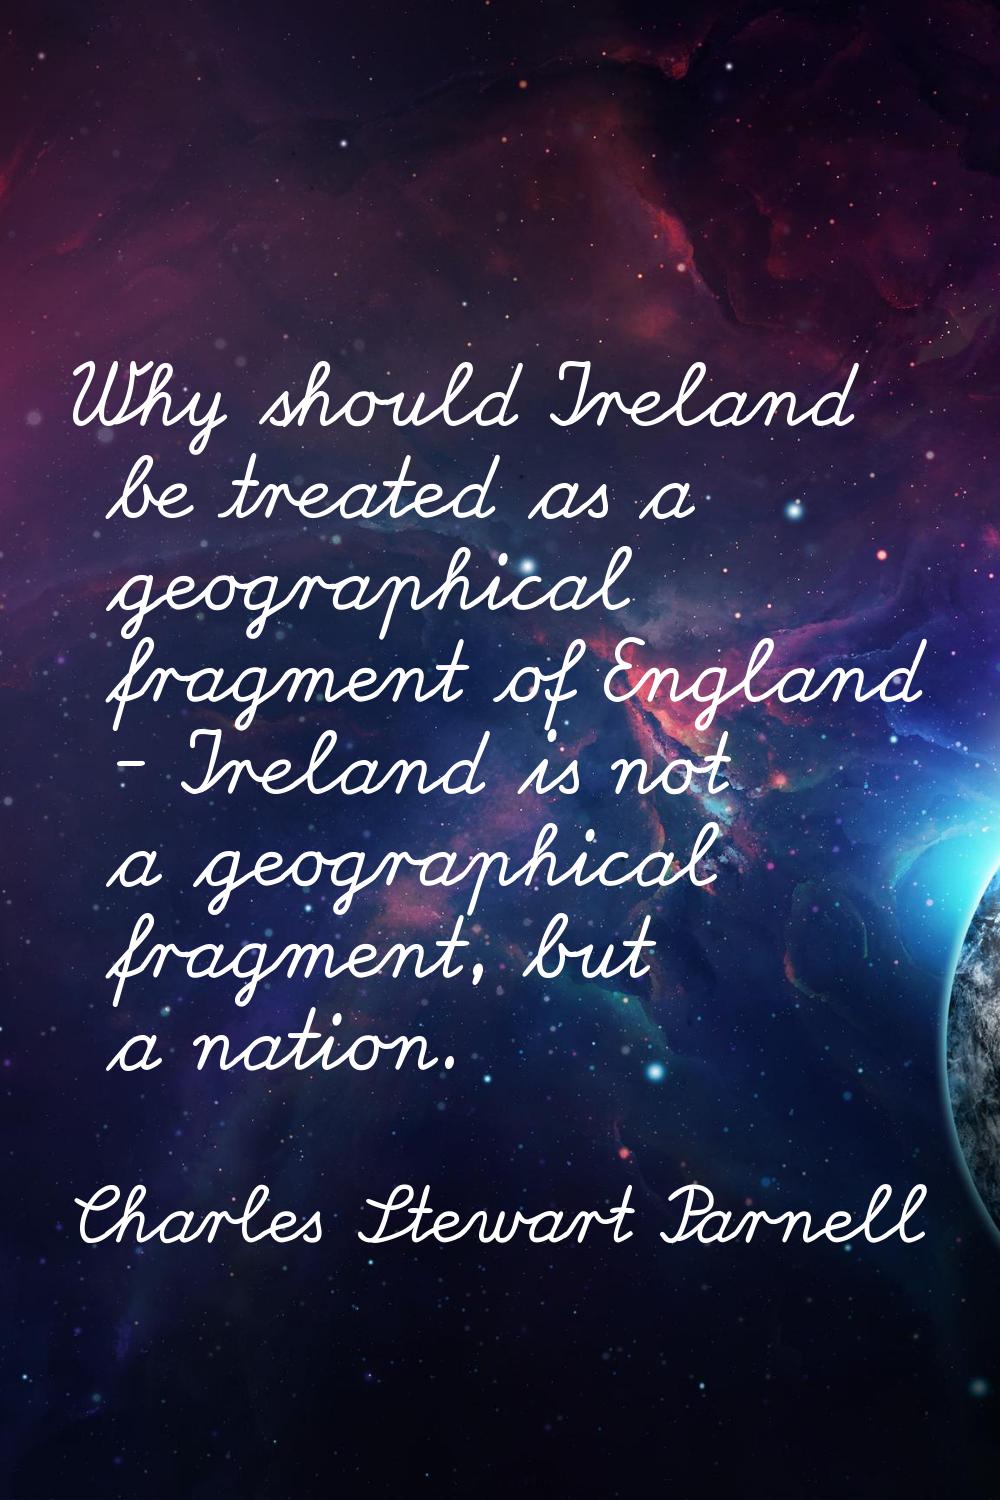 Why should Ireland be treated as a geographical fragment of England - Ireland is not a geographical